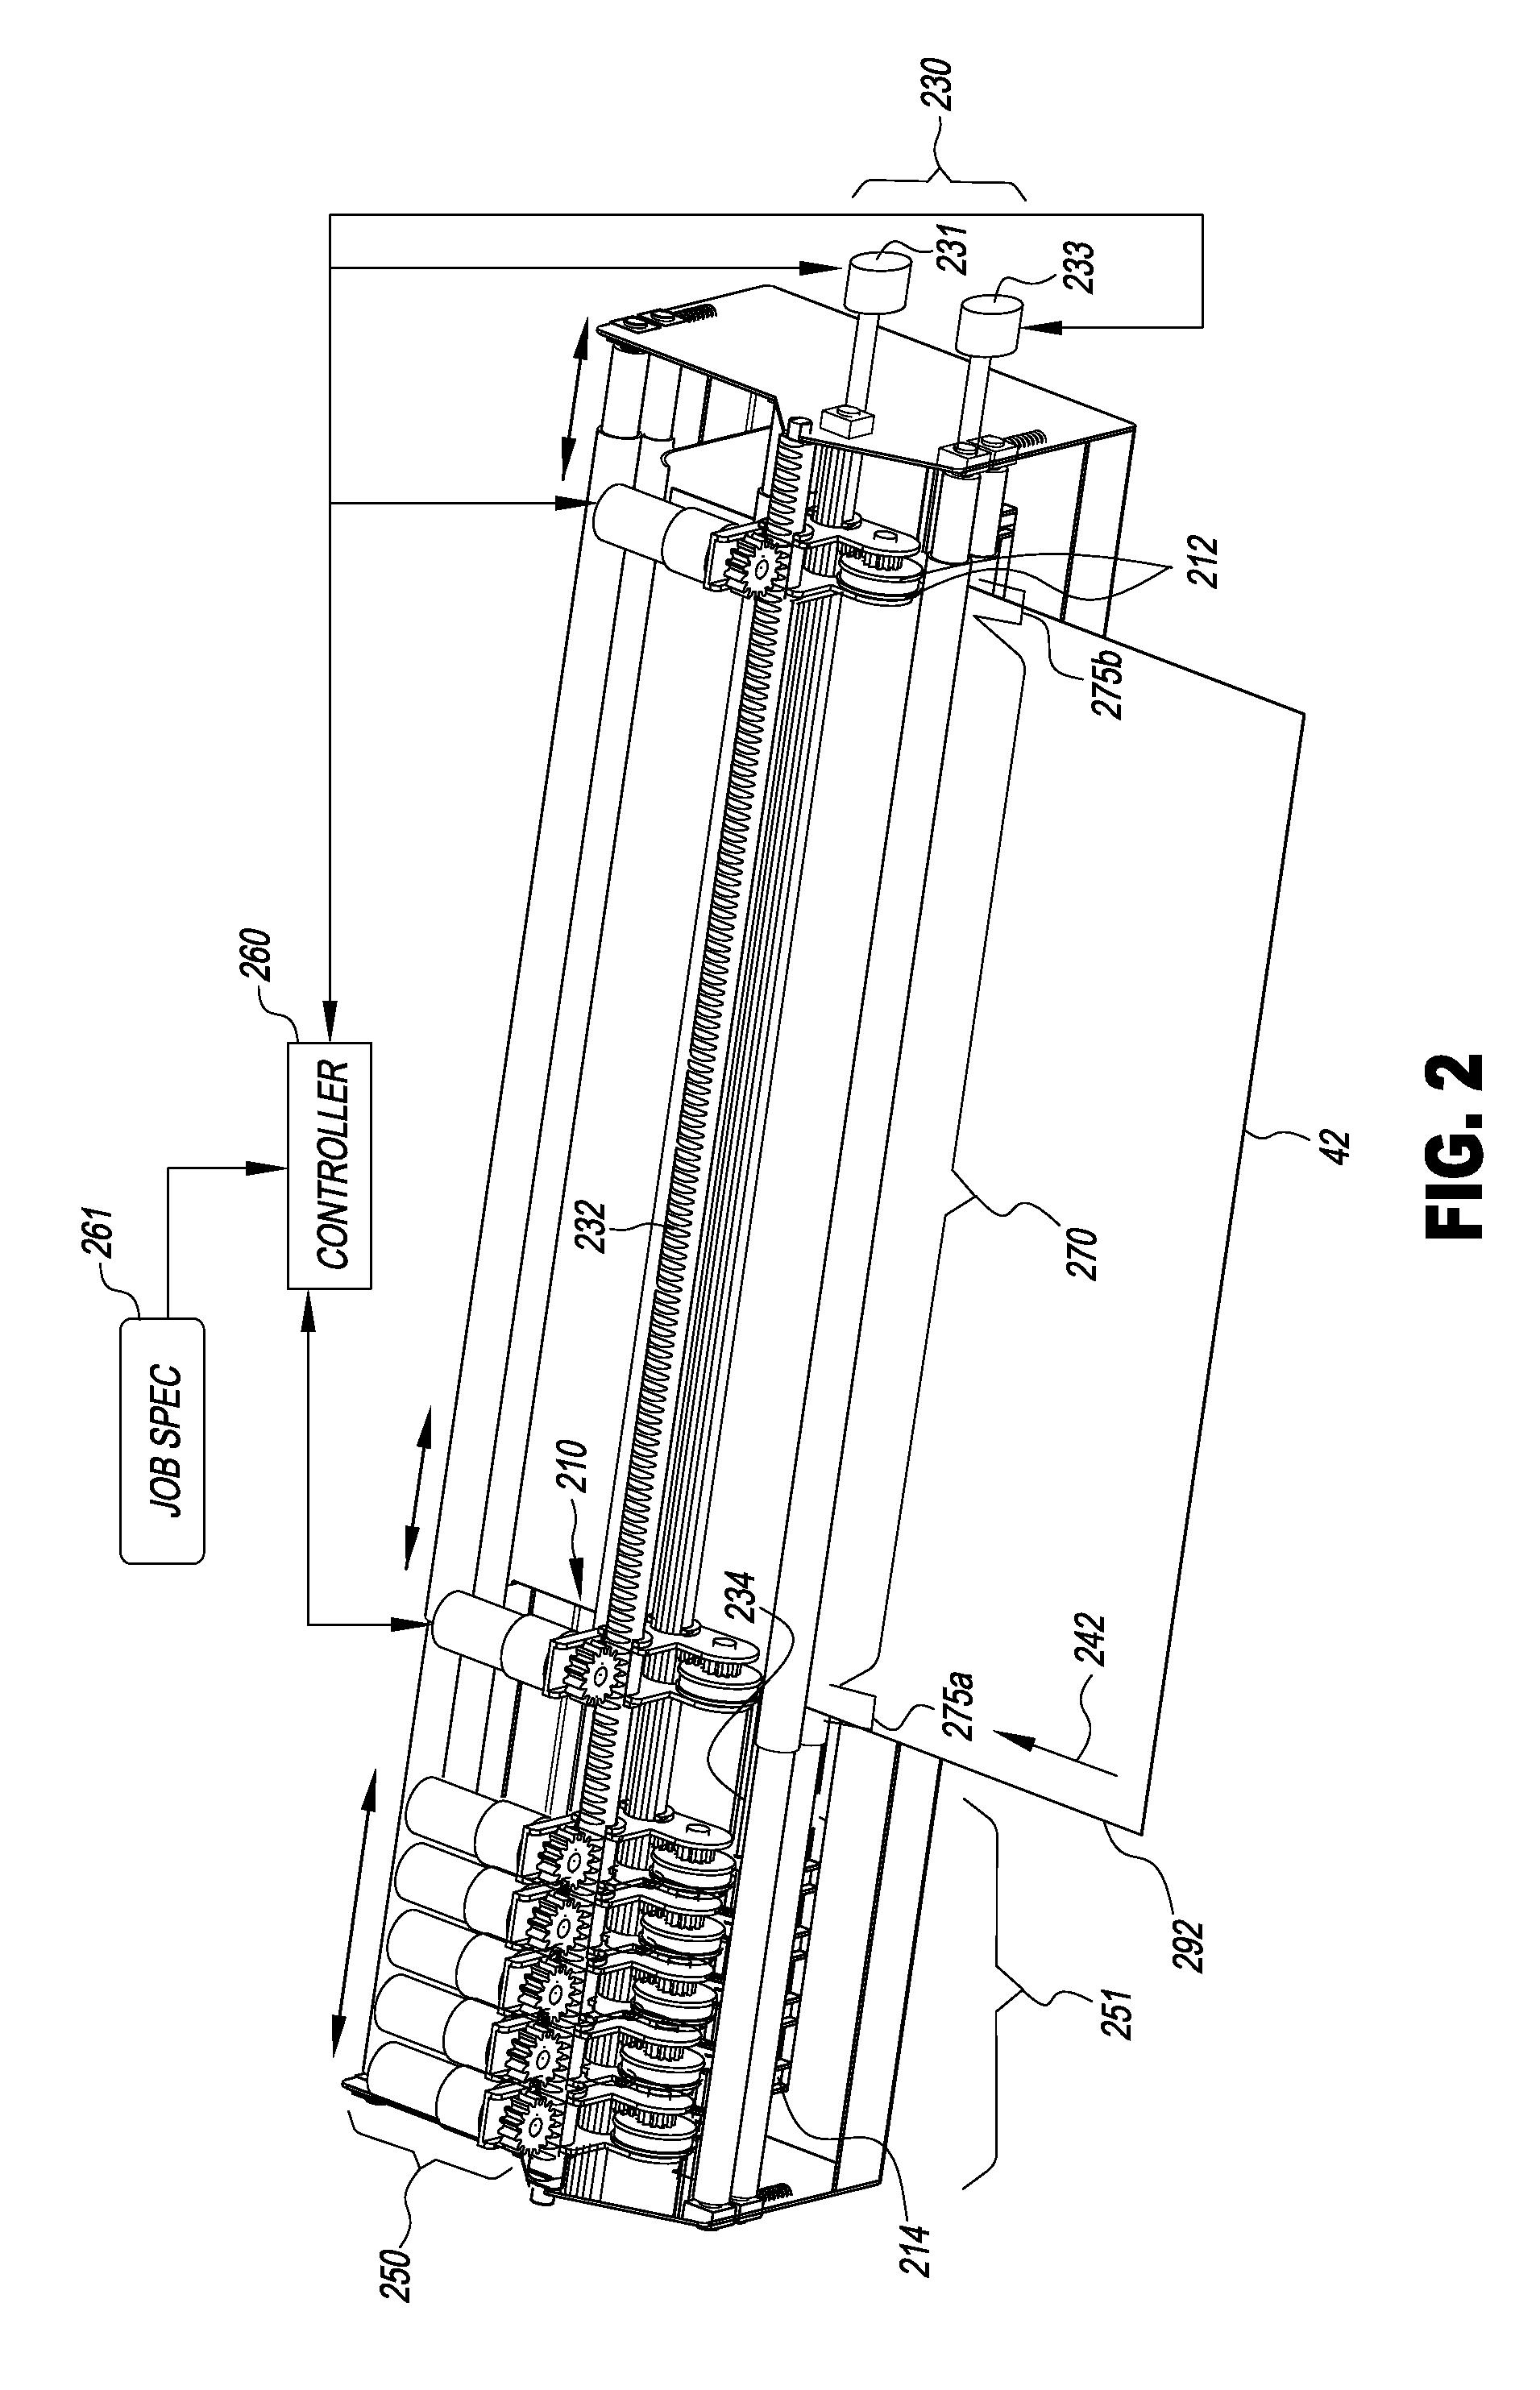 Slitter with translating cutting devices